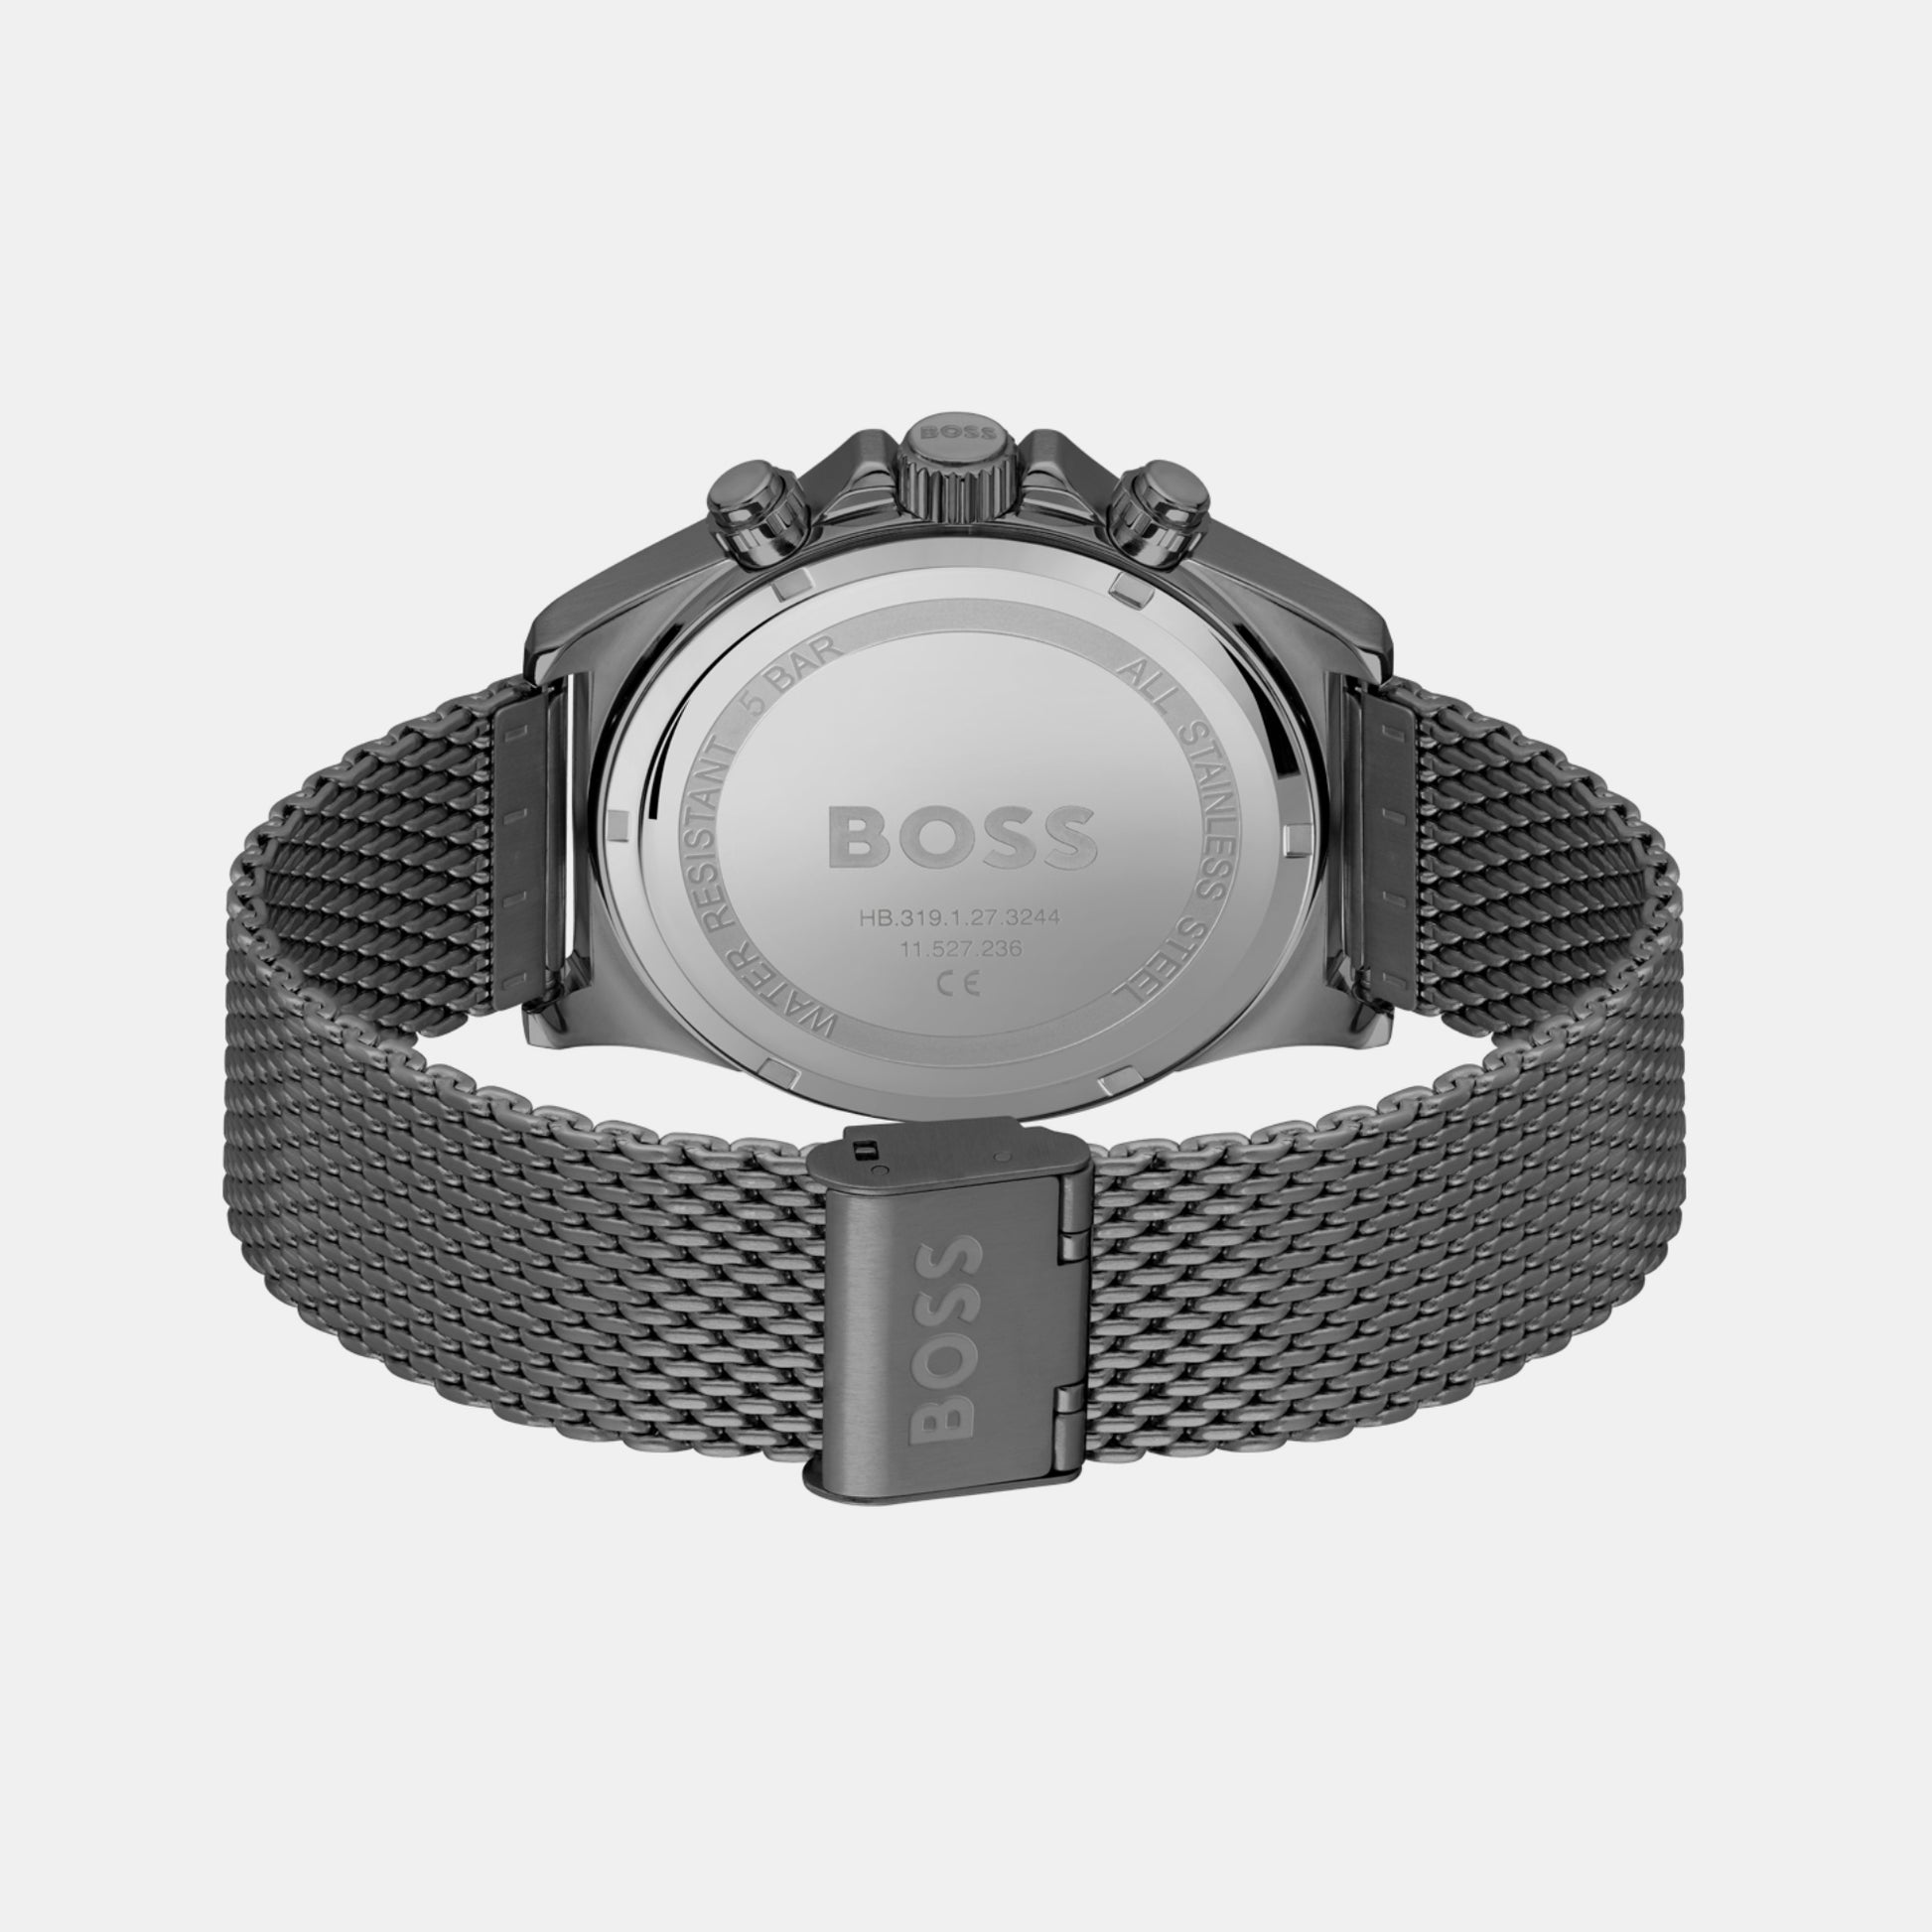 Mesh Chronograph Male In Grey – Watch 1514021 Just Hero Time